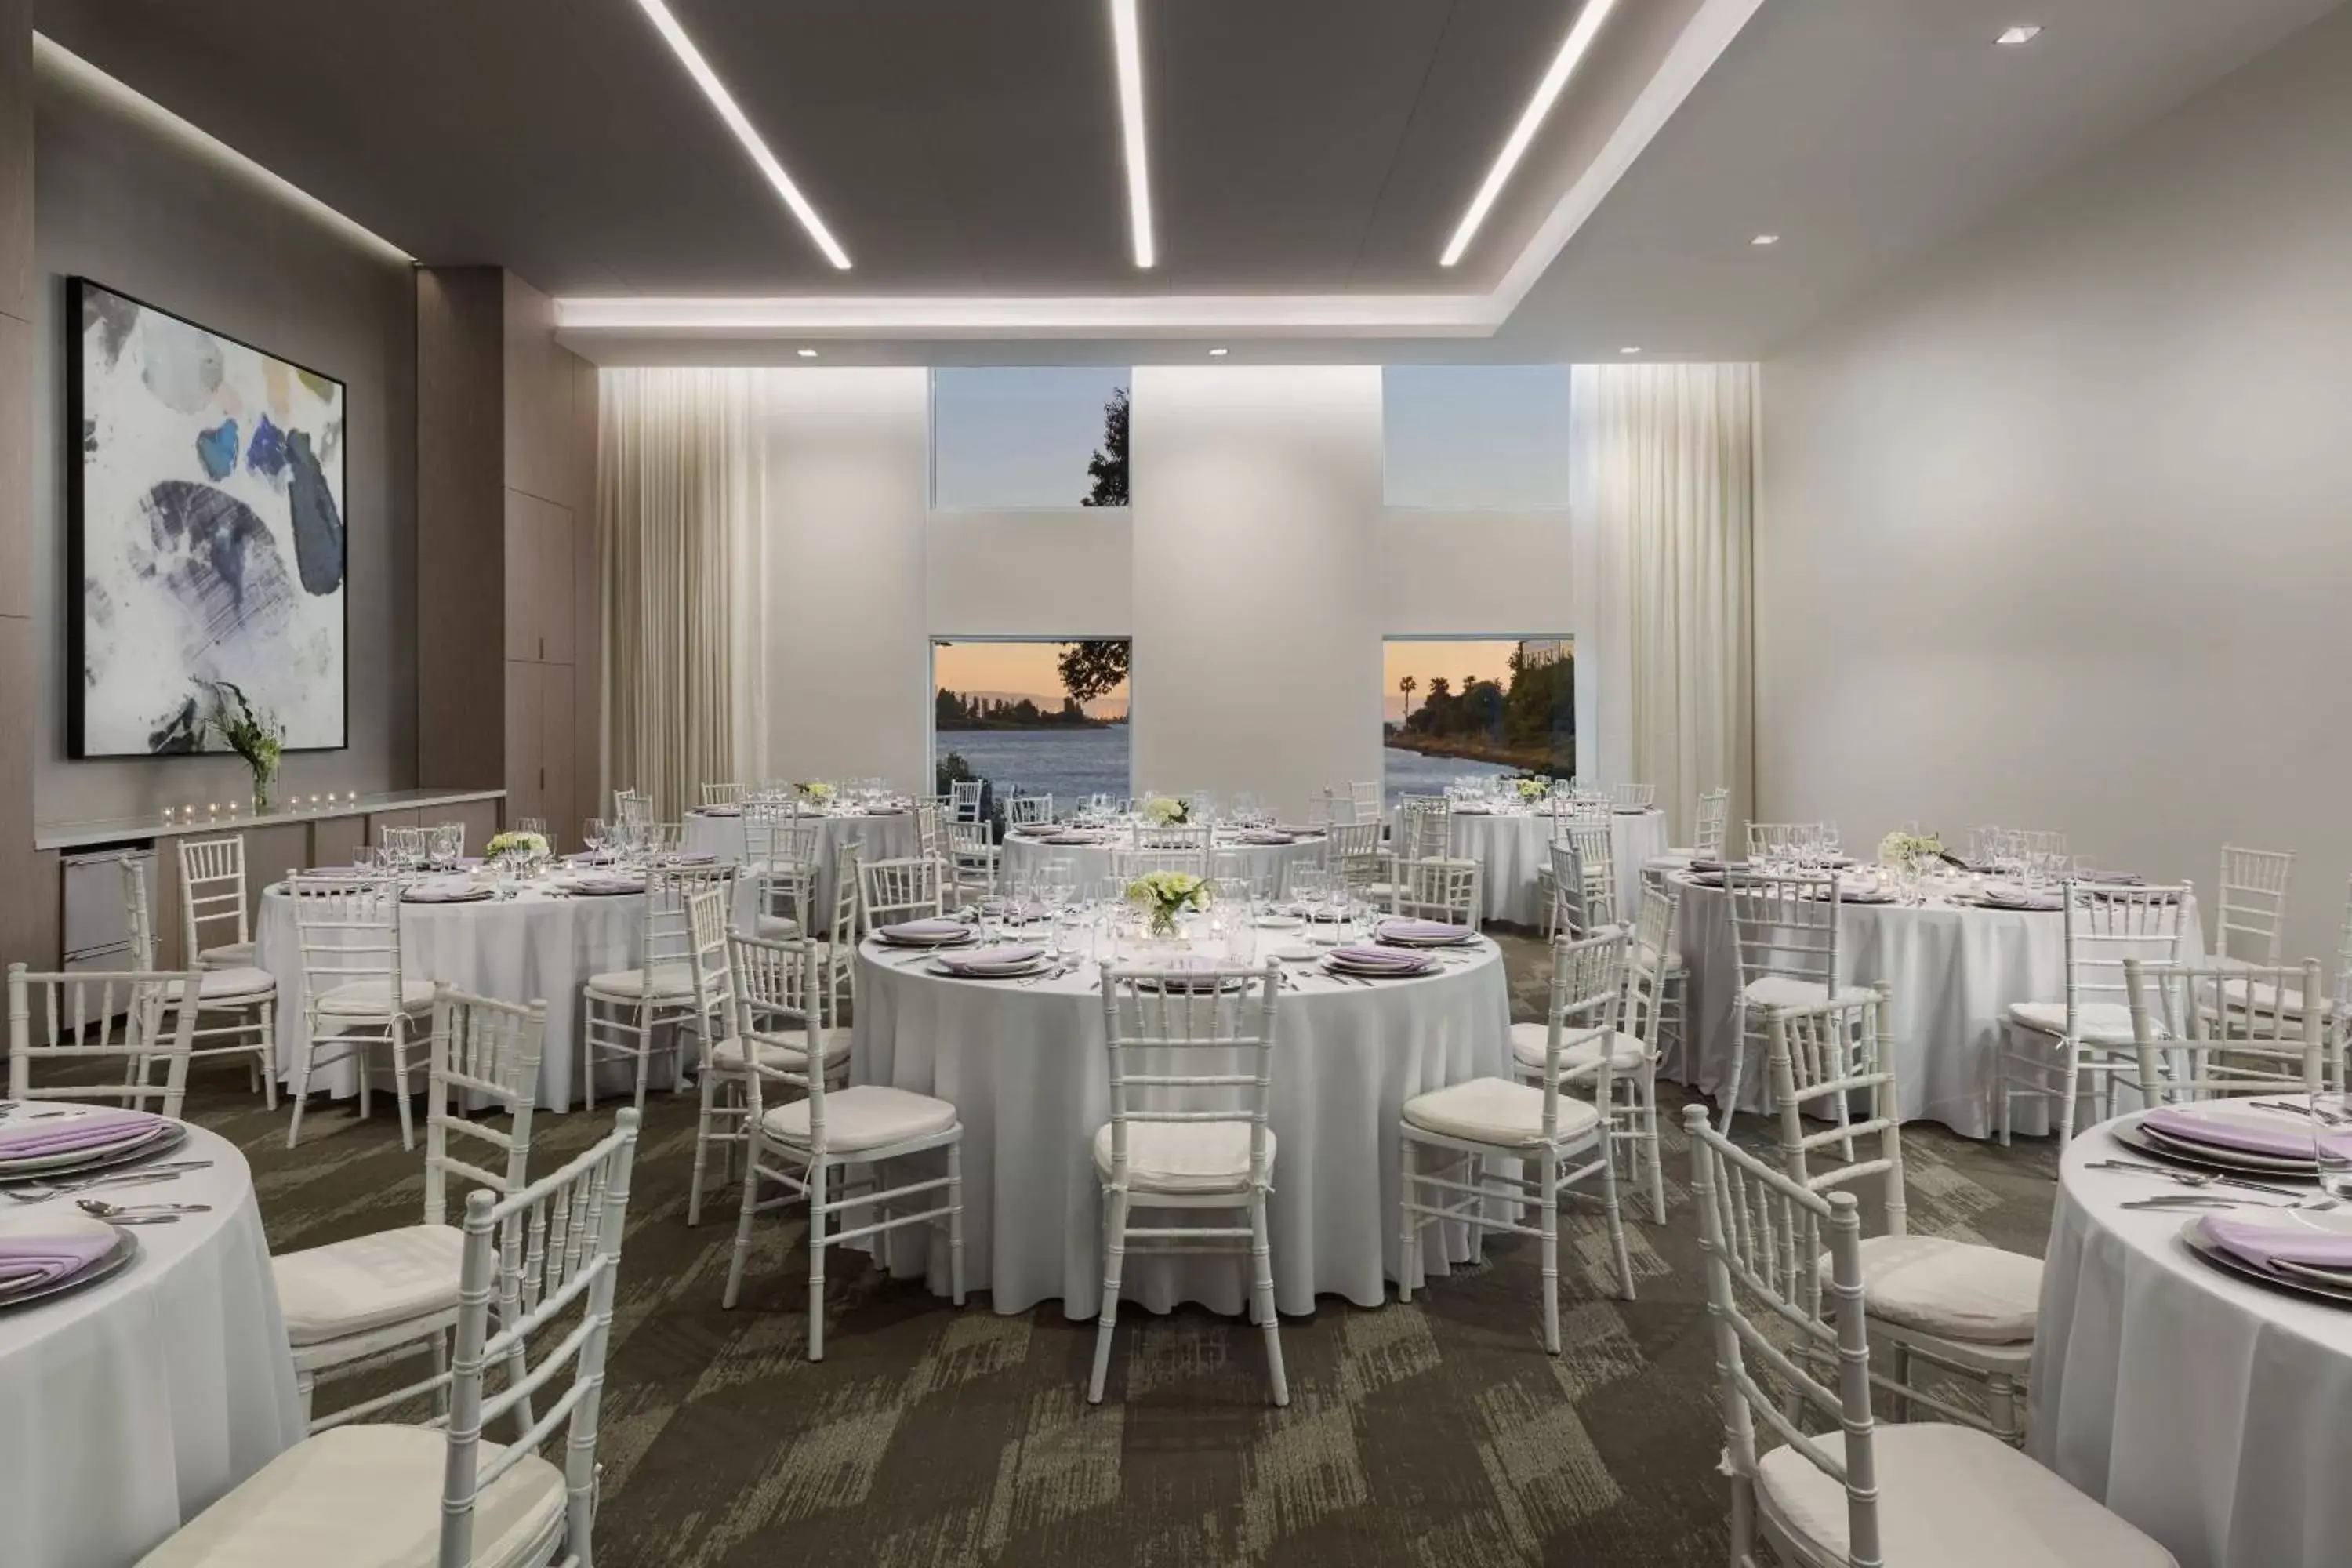 Banquet/Function facilities, Banquet Facilities in AC Hotel by Marriott San Francisco Airport/Oyster Point Waterfront